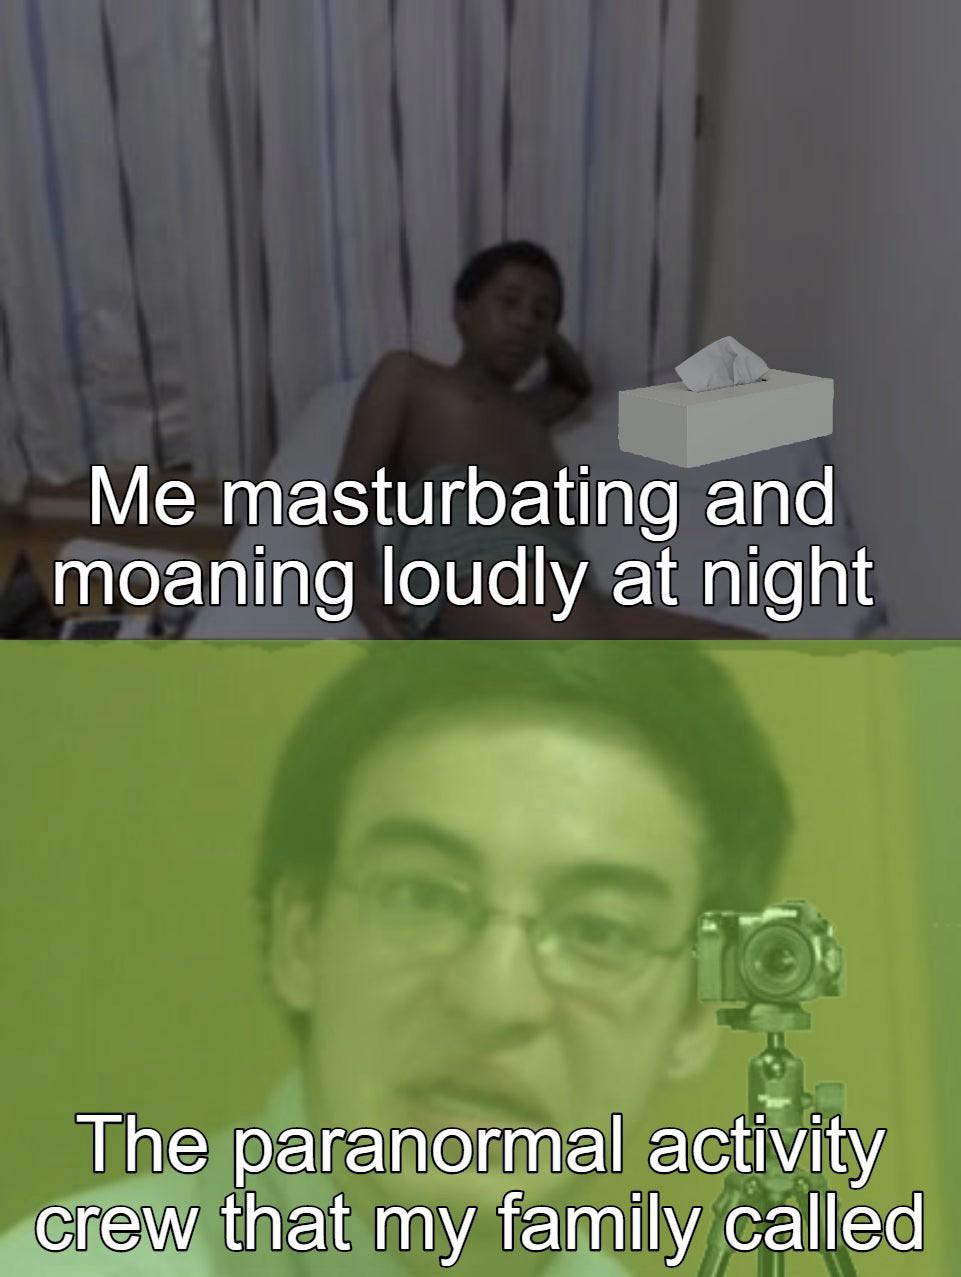 dank memes - funny memes - Me masturbating and moaning loudly at night The paranormal activity crew that my family called